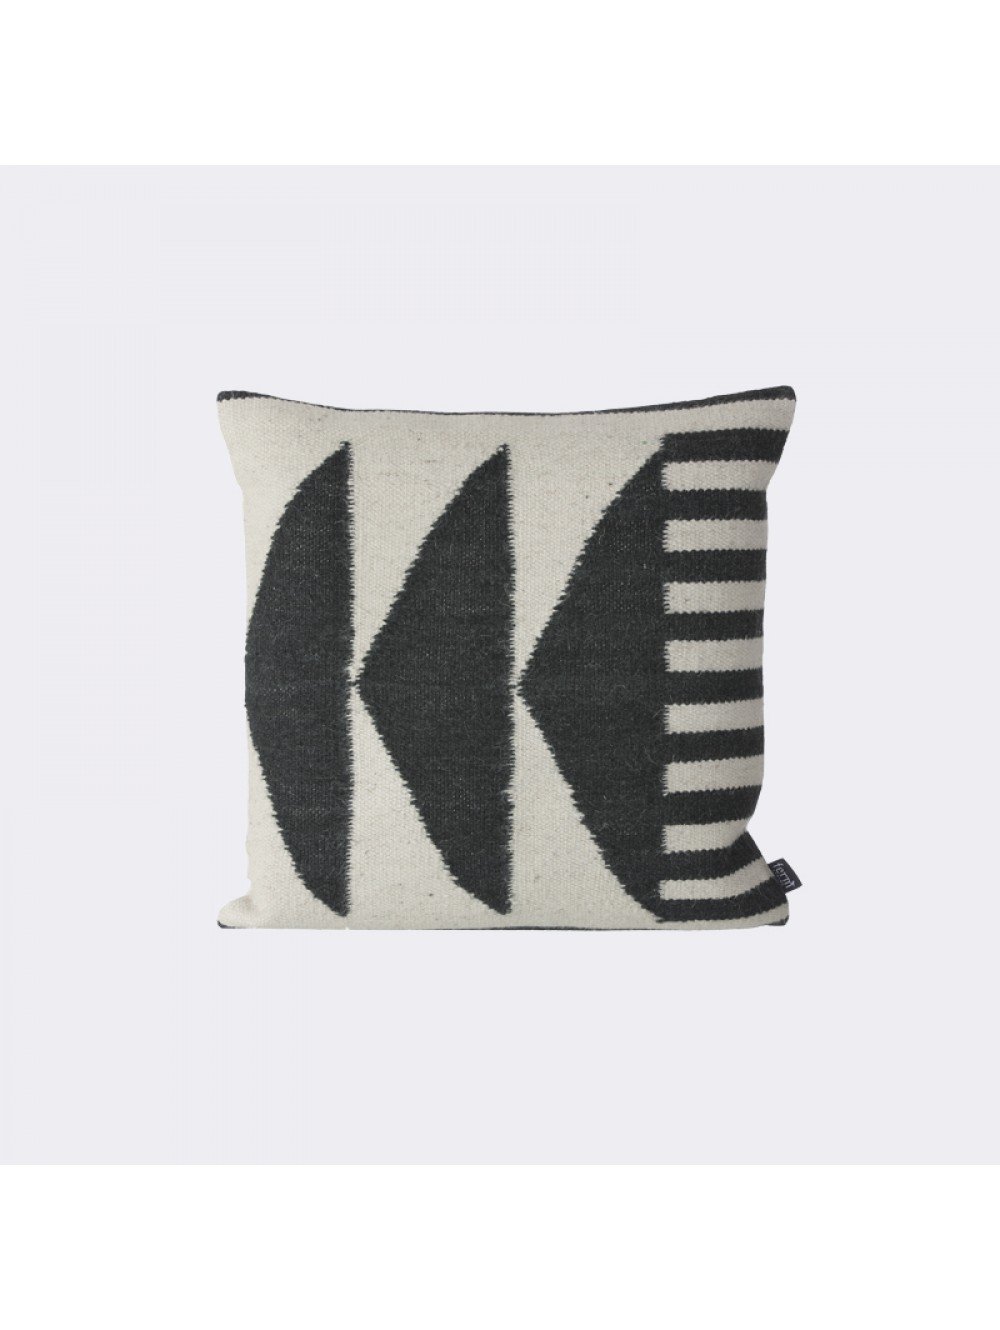 Kelim Pillow - Black Triangles - 19.69" x 19.69" - Down Filled - Image 0